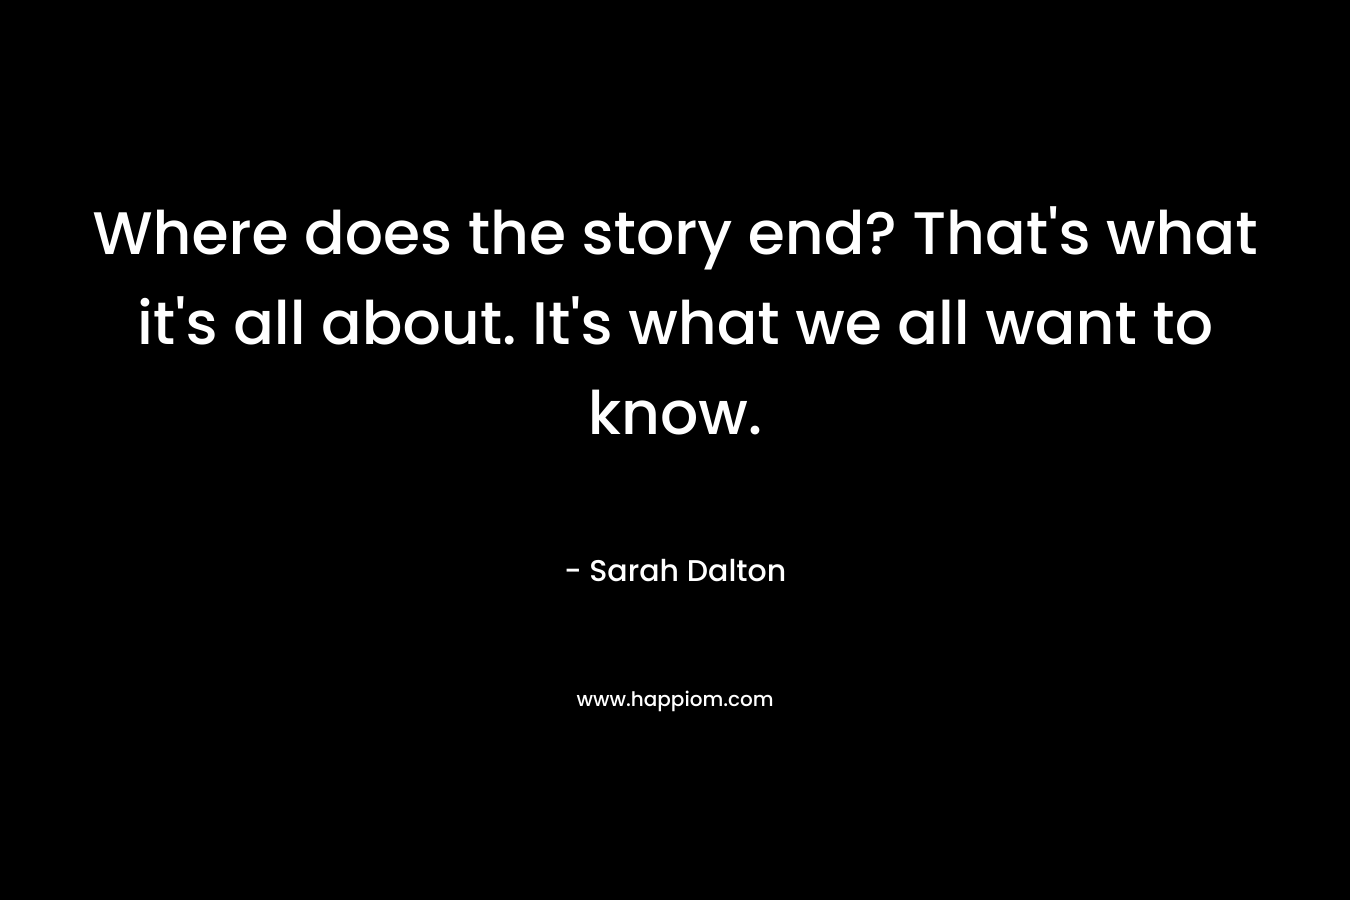 Where does the story end? That's what it's all about. It's what we all want to know.